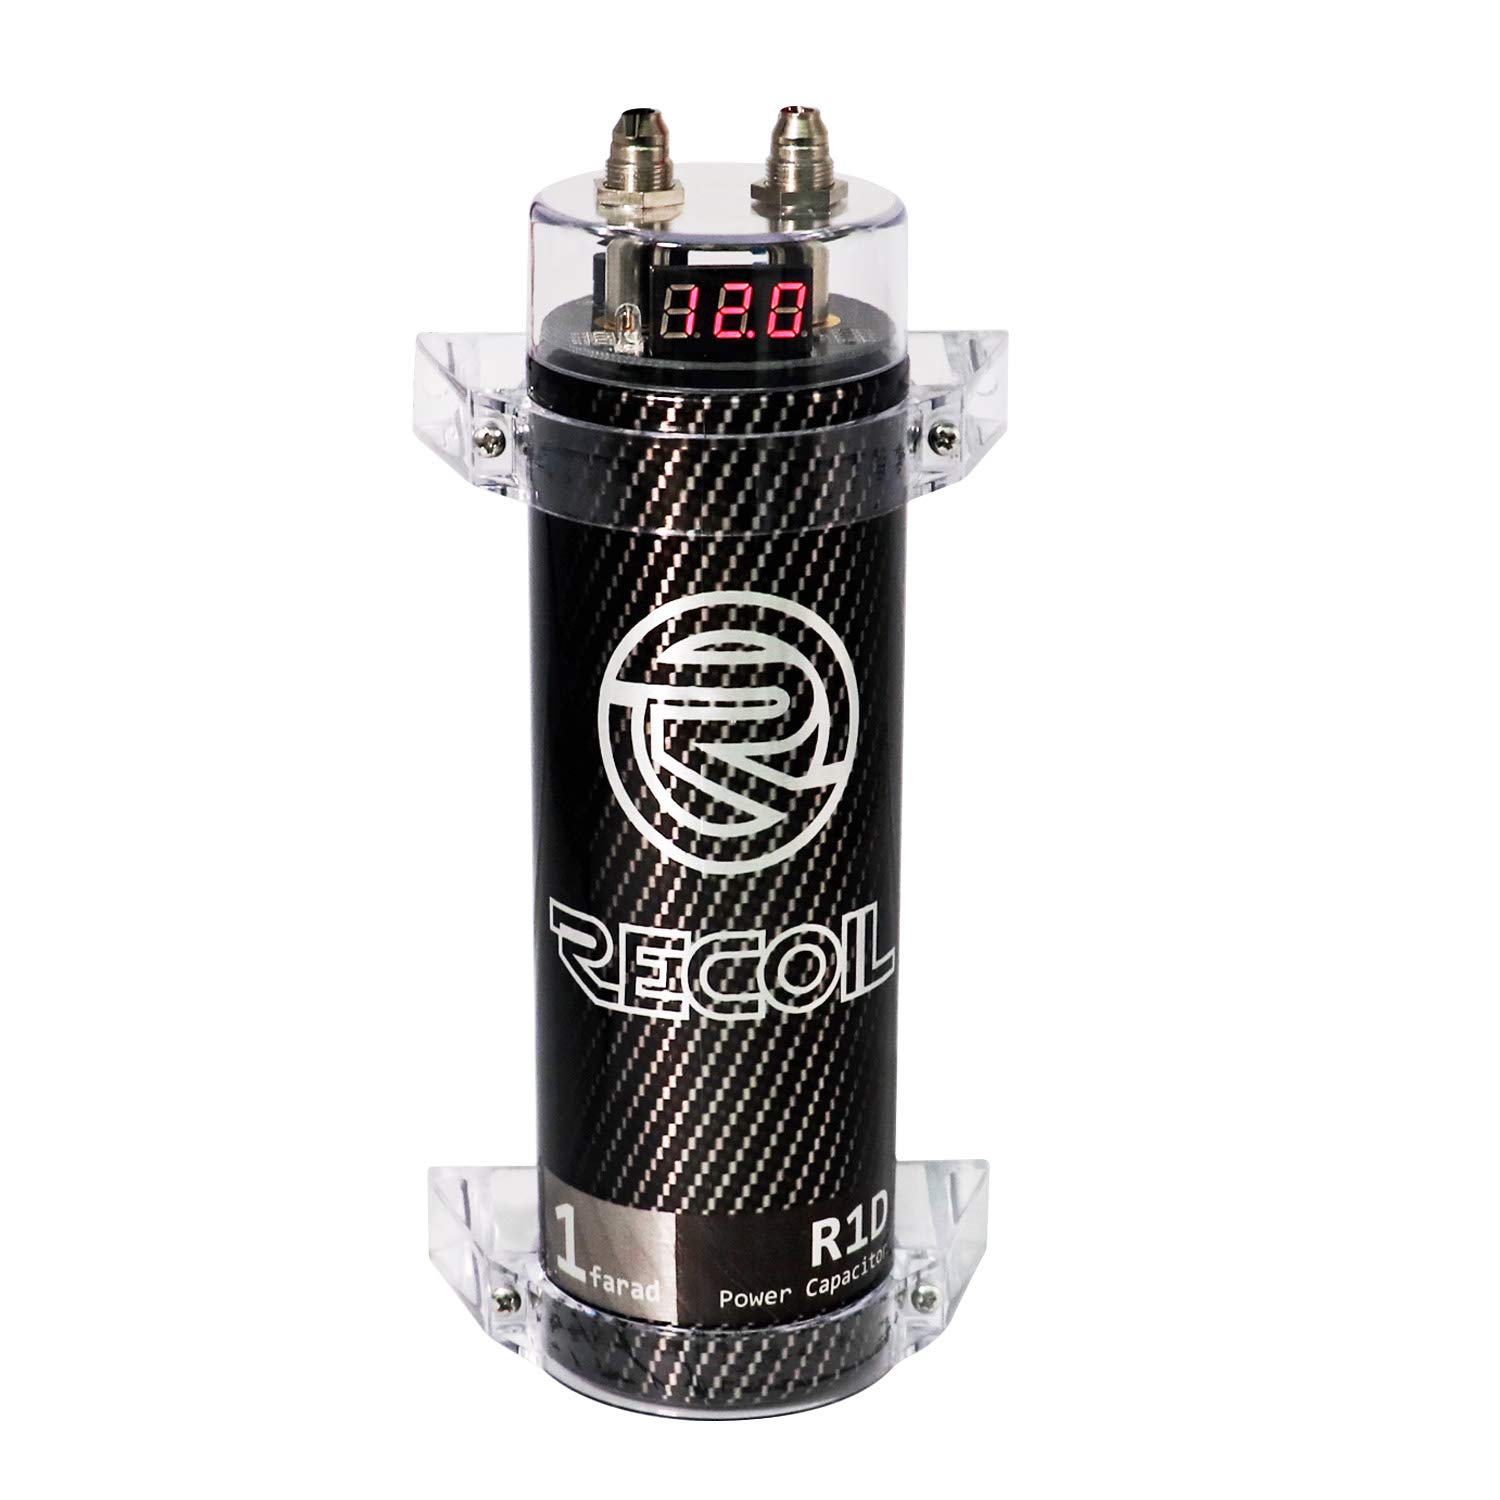 RECOIL R1D 1.0 Farad Car Audio Energy Storage Reinforcement Capacitor with Red Digital Read-Out